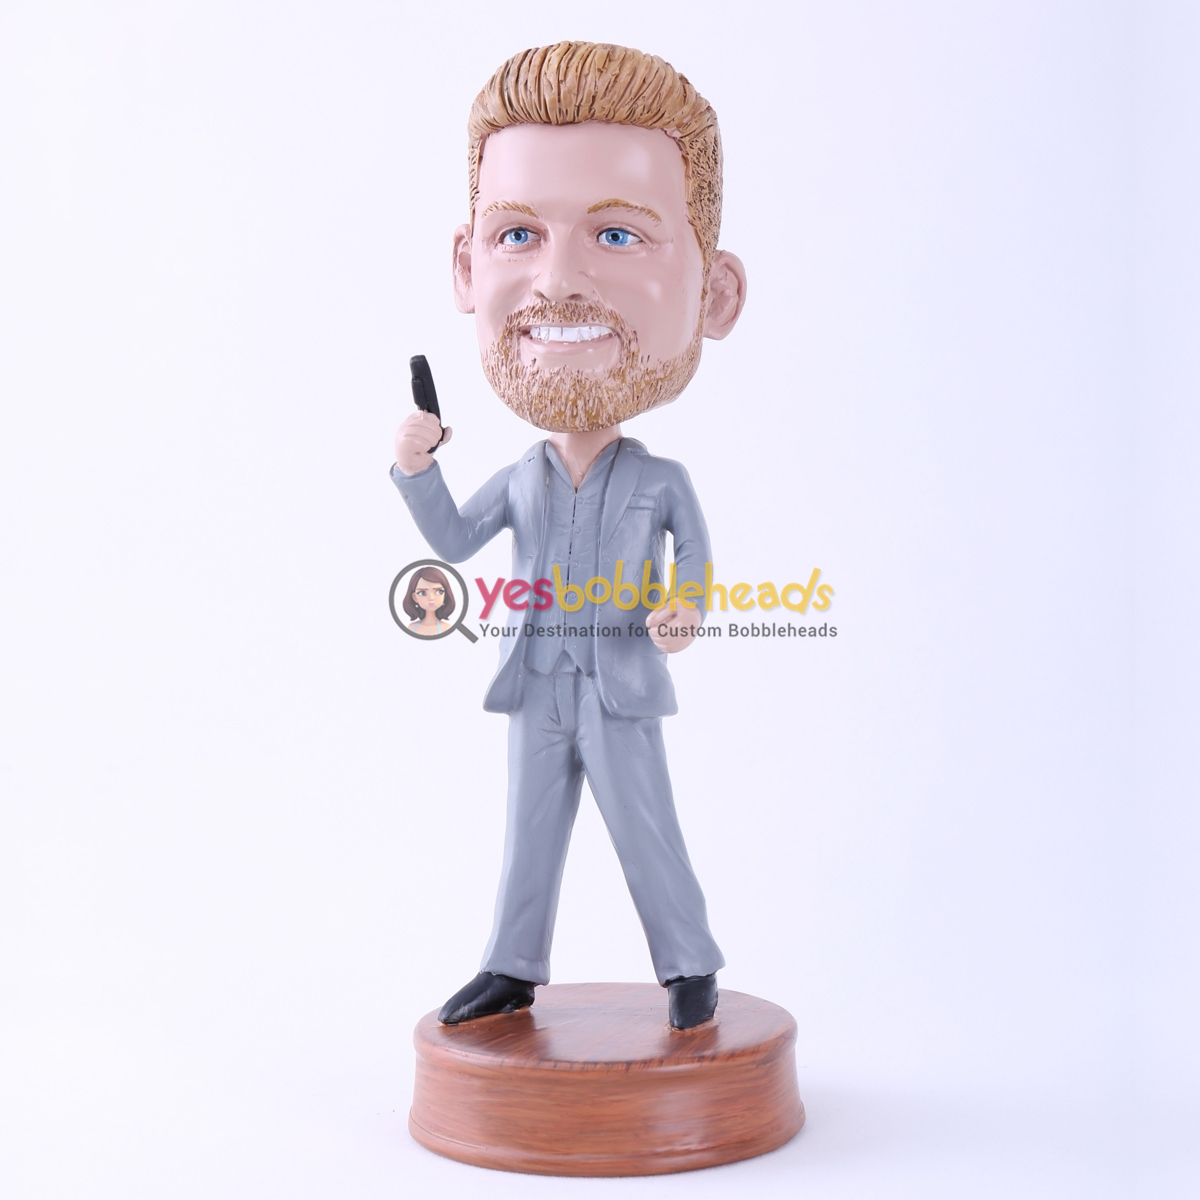 Picture of Custom Bobblehead Doll: James Bond Cosplay